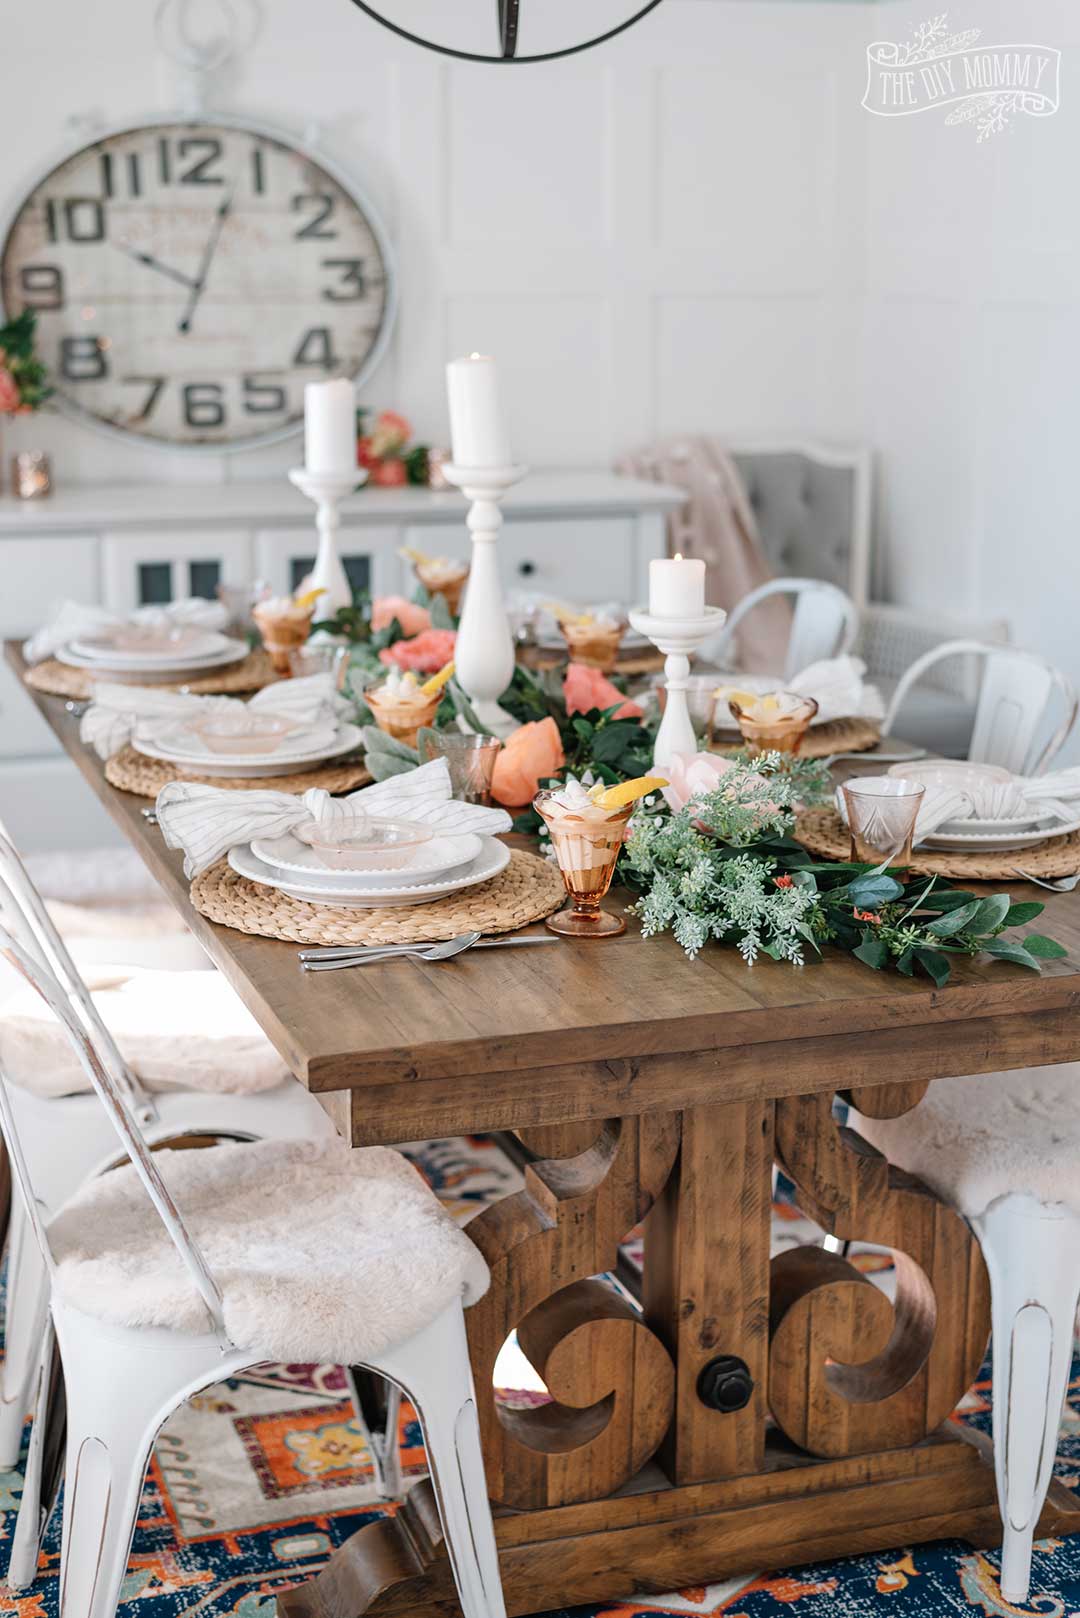 Spring / Easter tablescape idea in warm pinks, oranges, and vintage-inspired accessories.